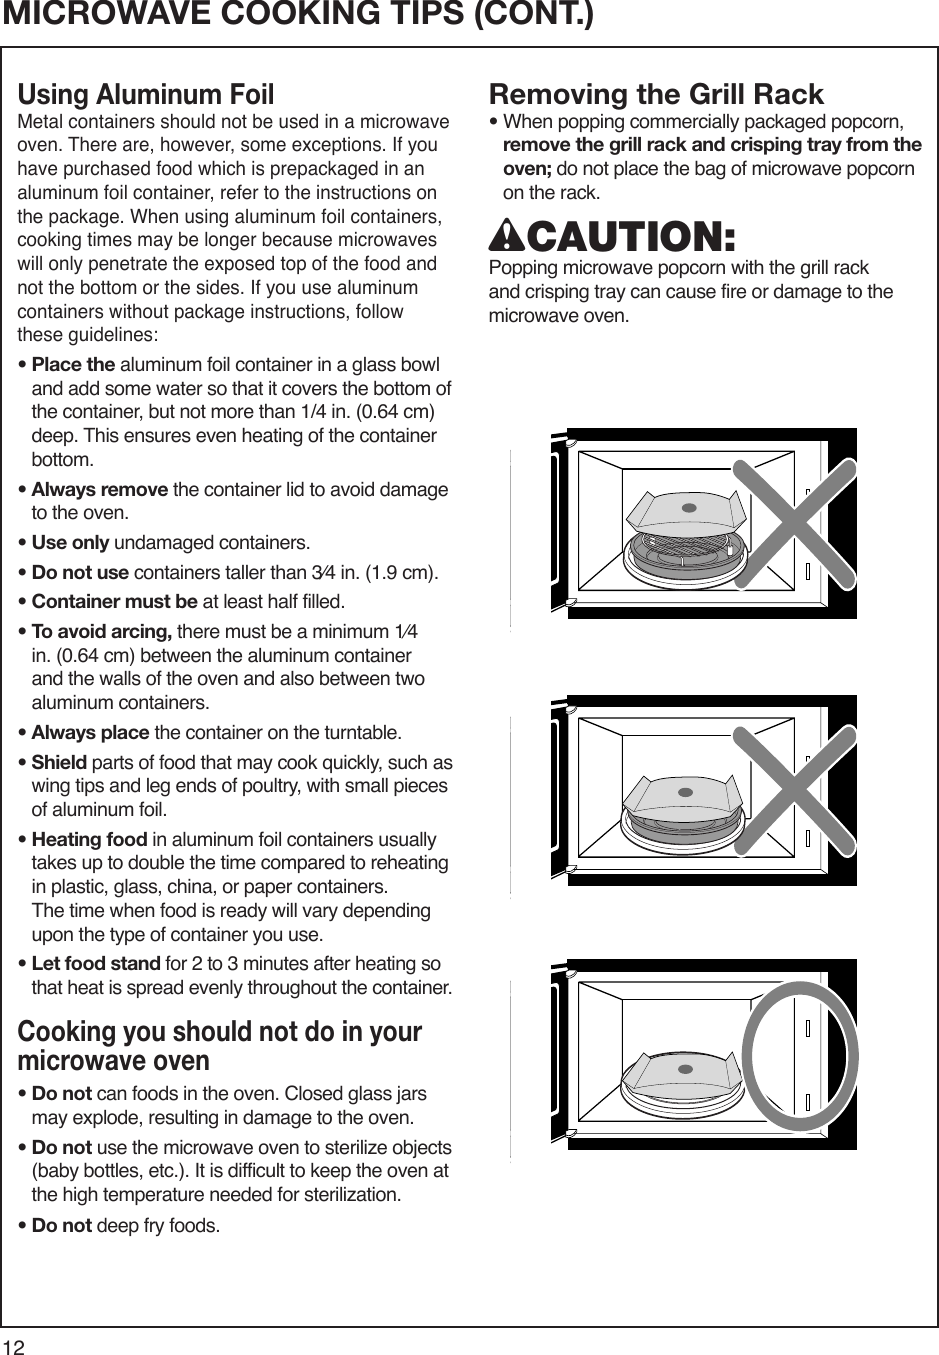 12MICROWAVE COOKING TIPSMICROWAVE COOKING TIPS (CONT.)Using Aluminum Foil Metal containers should not be used in a microwave oven. There are, however, some exceptions. If you have purchased food which is prepackaged in an aluminum foil container, refer to the instructions on the package. When using aluminum foil containers, cooking times may be longer because microwaves will only penetrate the exposed top of the food and not the bottom or the sides. If you use aluminum containers without package instructions, follow these guidelines:•  Place the aluminum foil container in a glass bowl and add some water so that it covers the bottom of the container, but not more than 1/4 in. (0.64 cm) deep. This ensures even heating of the container bottom.•  Always remove the container lid to avoid damage to the oven.• Use only undamaged containers.• Do not use containers taller than 3⁄4 in. (1.9 cm).• Container must be at least half filled.•  To avoid arcing, there must be a minimum 1⁄4 in. (0.64 cm) between the aluminum container and the walls of the oven and also between two aluminum containers.• Always place the container on the turntable.•  Shield parts of food that may cook quickly, such as wing tips and leg ends of poultry, with small pieces of aluminum foil.•  Heating food in aluminum foil containers usually takes up to double the time compared to reheating in plastic, glass, china, or paper containers. The time when food is ready will vary depending upon the type of container you use.•  Let food stand for 2 to 3 minutes after heating so that heat is spread evenly throughout the container.Cooking you should not do in your microwave oven•  Do not can foods in the oven. Closed glass jars may explode, resulting in damage to the oven.•  Do not use the microwave oven to sterilize objects (baby bottles, etc.). It is difficult to keep the oven at the high temperature needed for sterilization.•  Do not deep fry foods.Removing the Grill Rack•  When popping commercially packaged popcorn, remove the grill rack and crisping tray from the oven; do not place the bag of microwave popcorn on the rack.wCAUTION:  Popping microwave popcorn with the grill rack and crisping tray can cause fire or damage to the microwave oven.